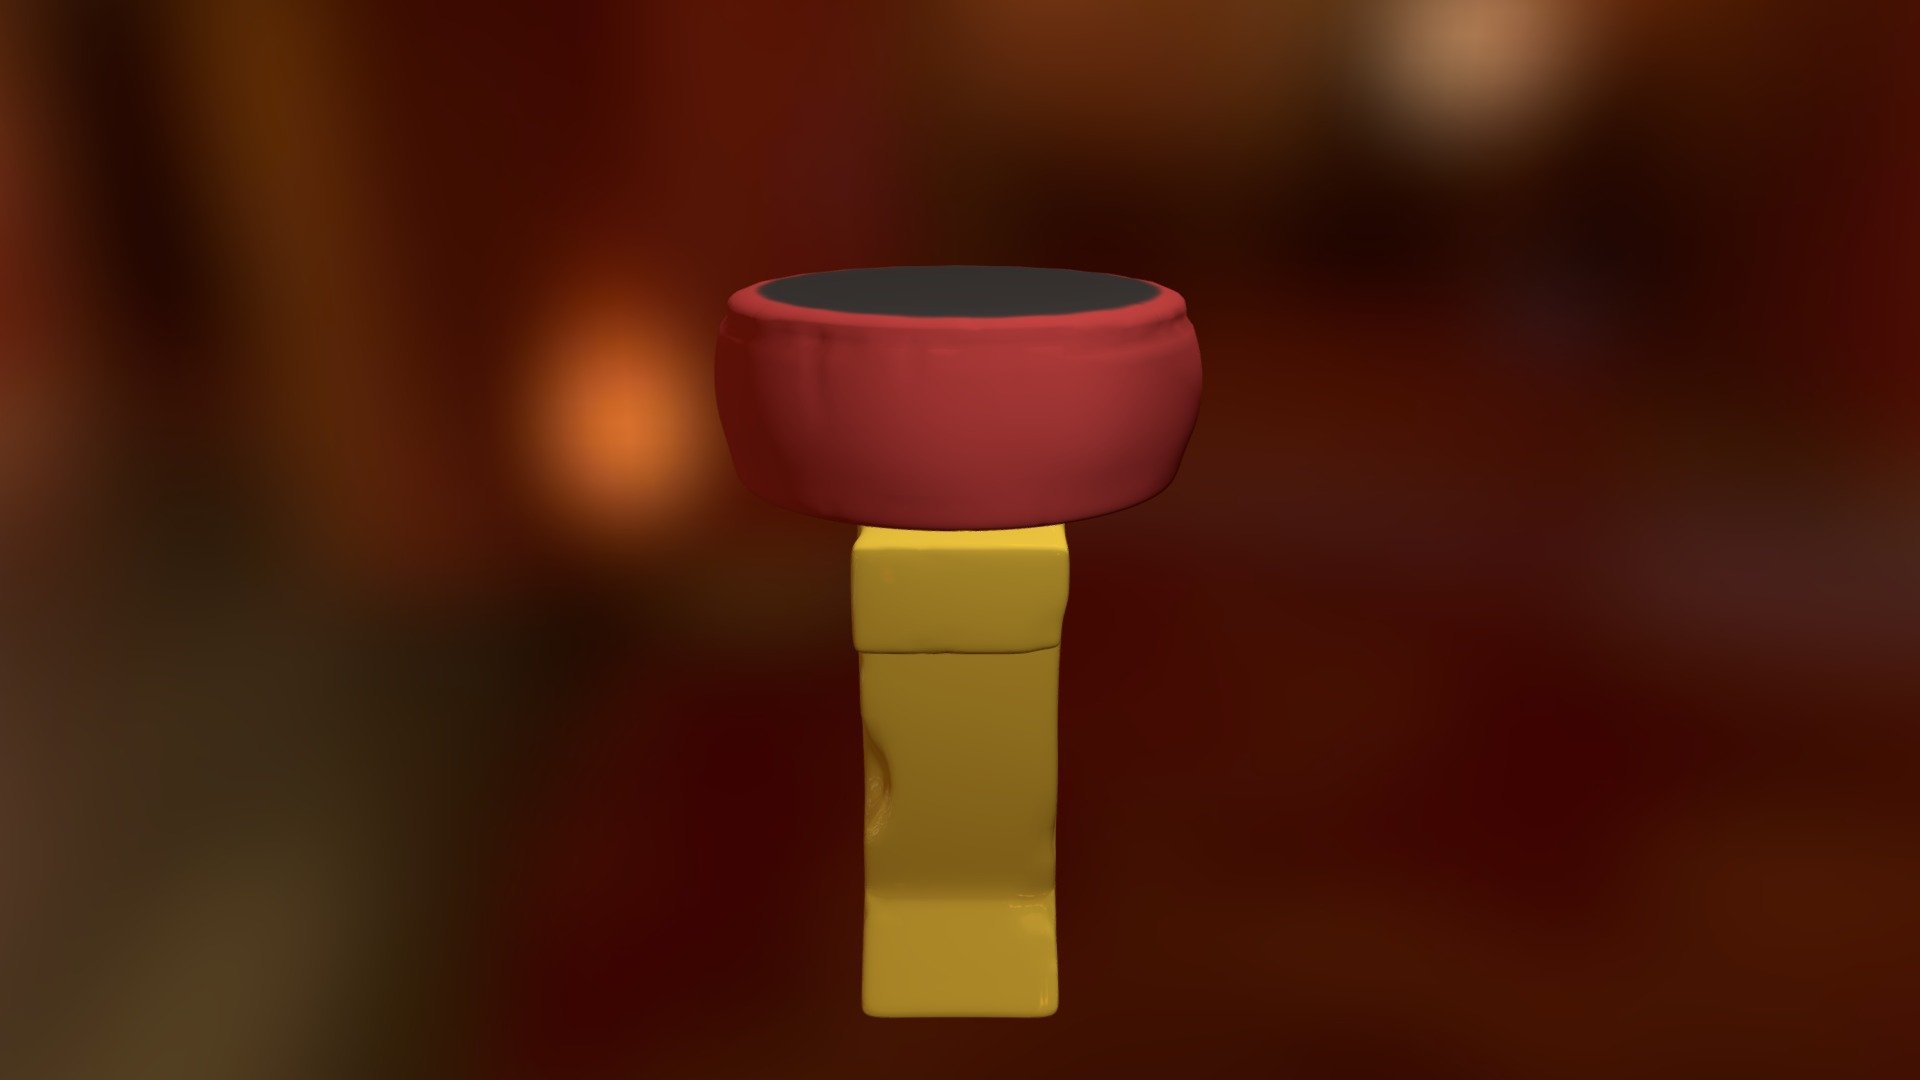 A Casino chair object I made for a rundown casino area in &ldquo;T is for Guilty